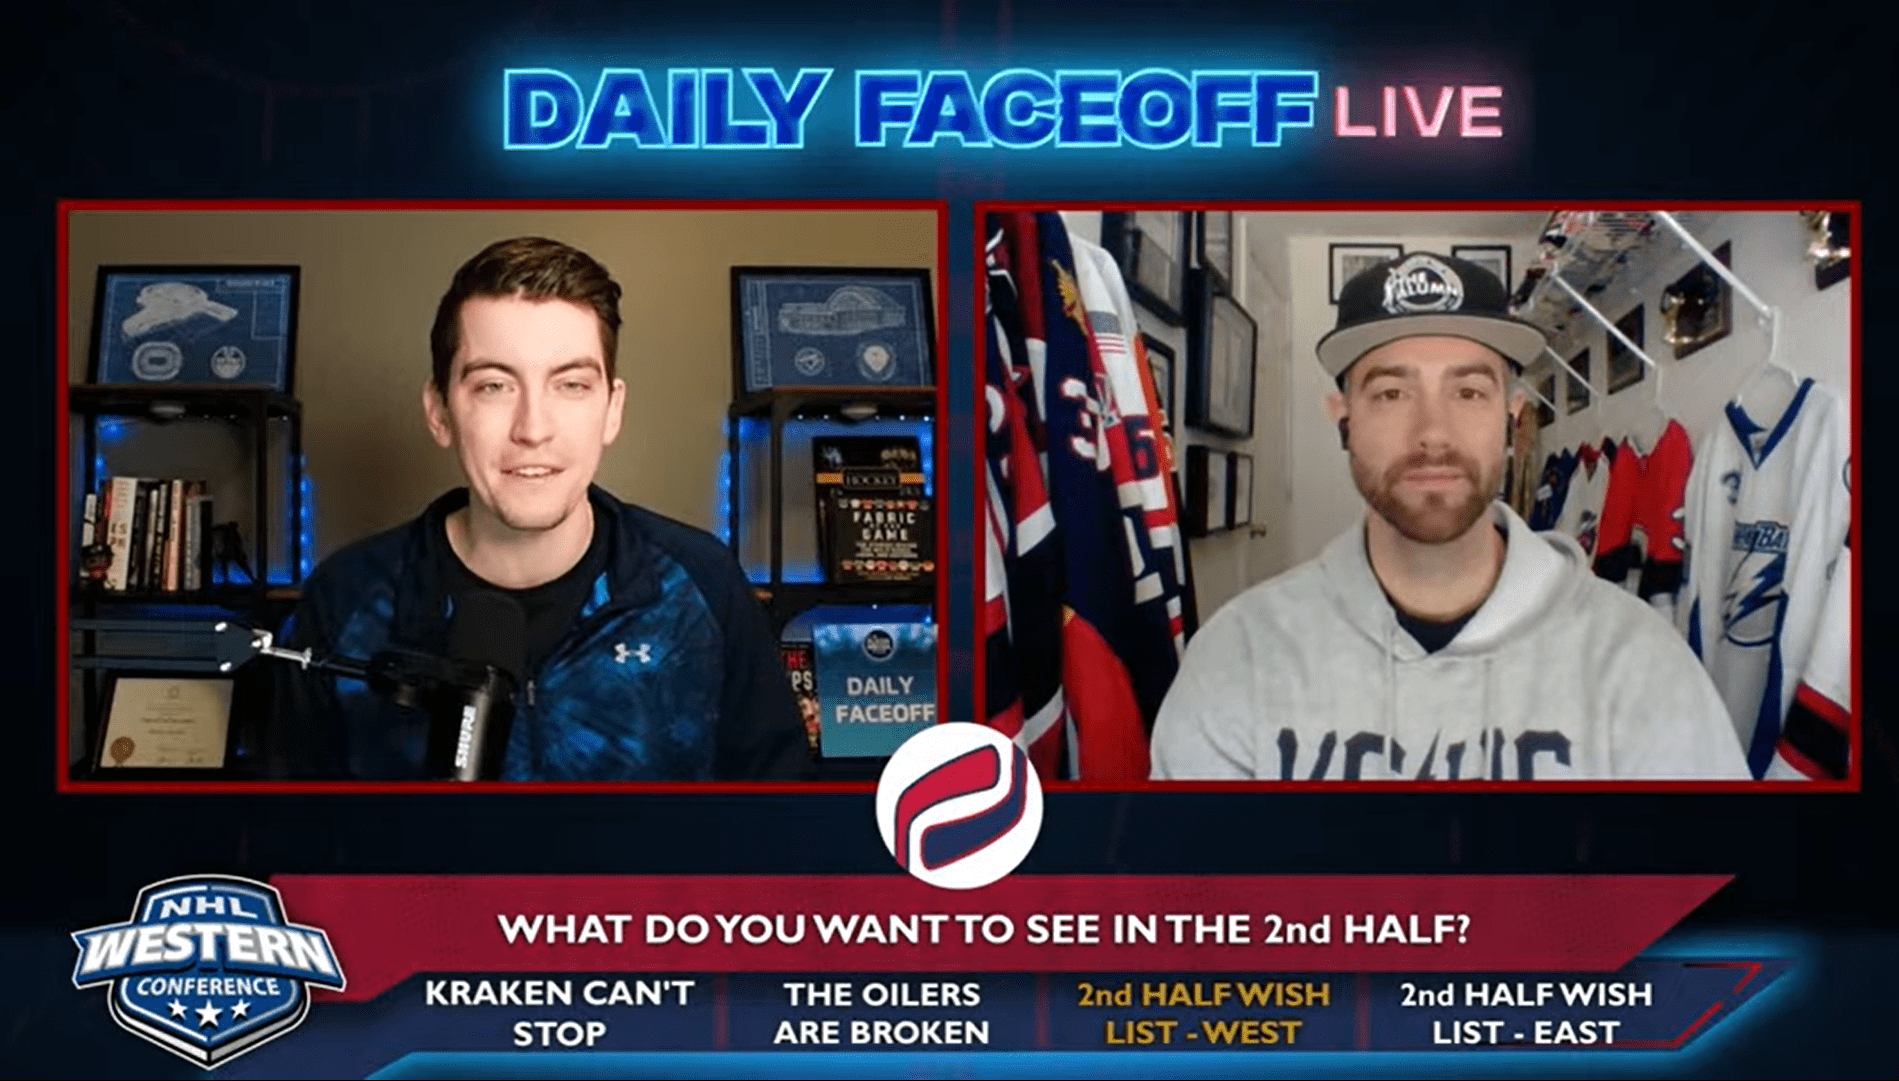 Daily Faceoff Live: Halfway point wish list for the East